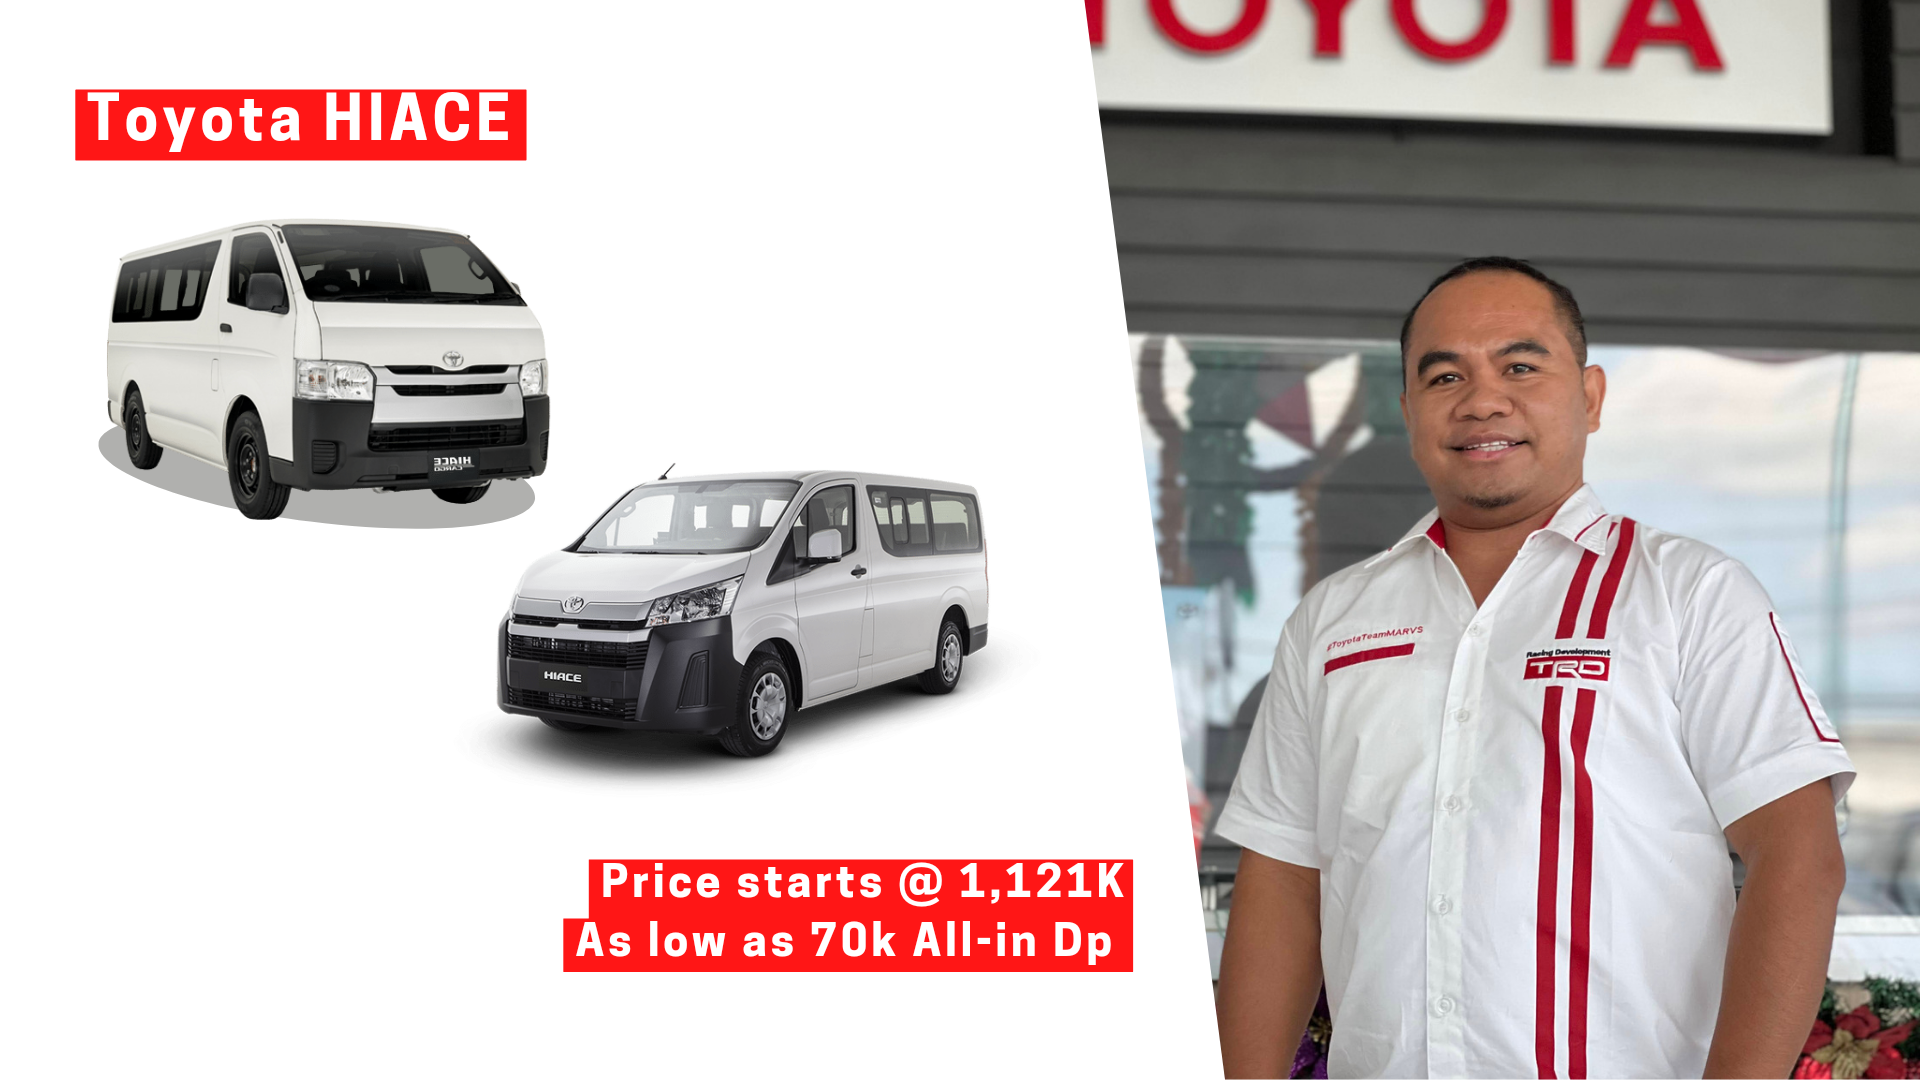 Toyota HIACE Promos by Rogelio Diosay